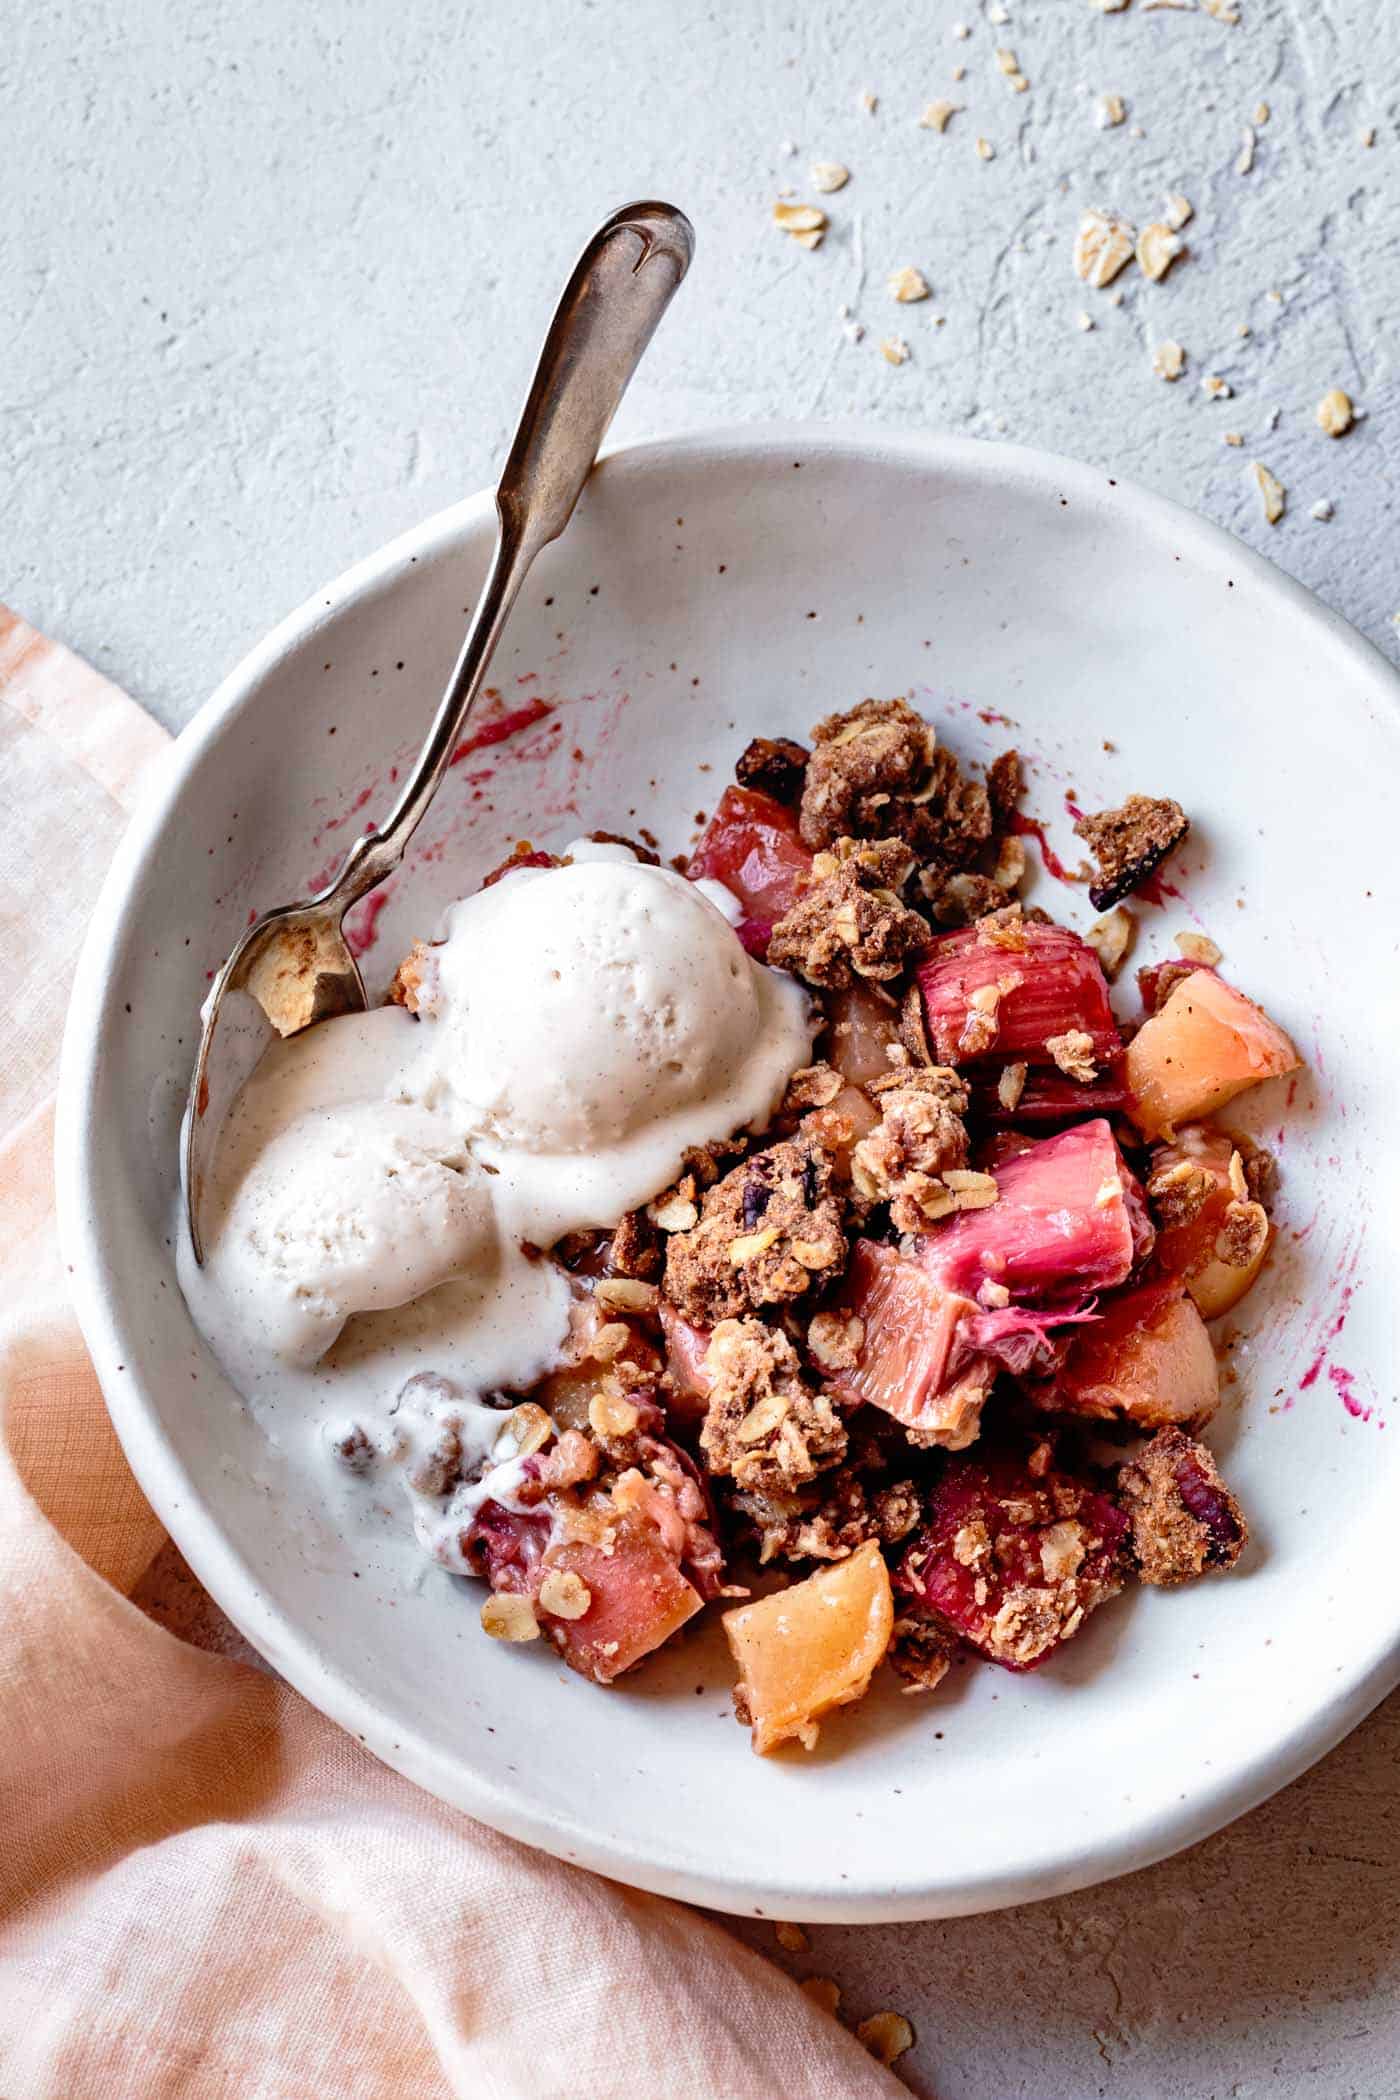 apple rhubarb dessert with crisp topping and ice cream in a white bowl